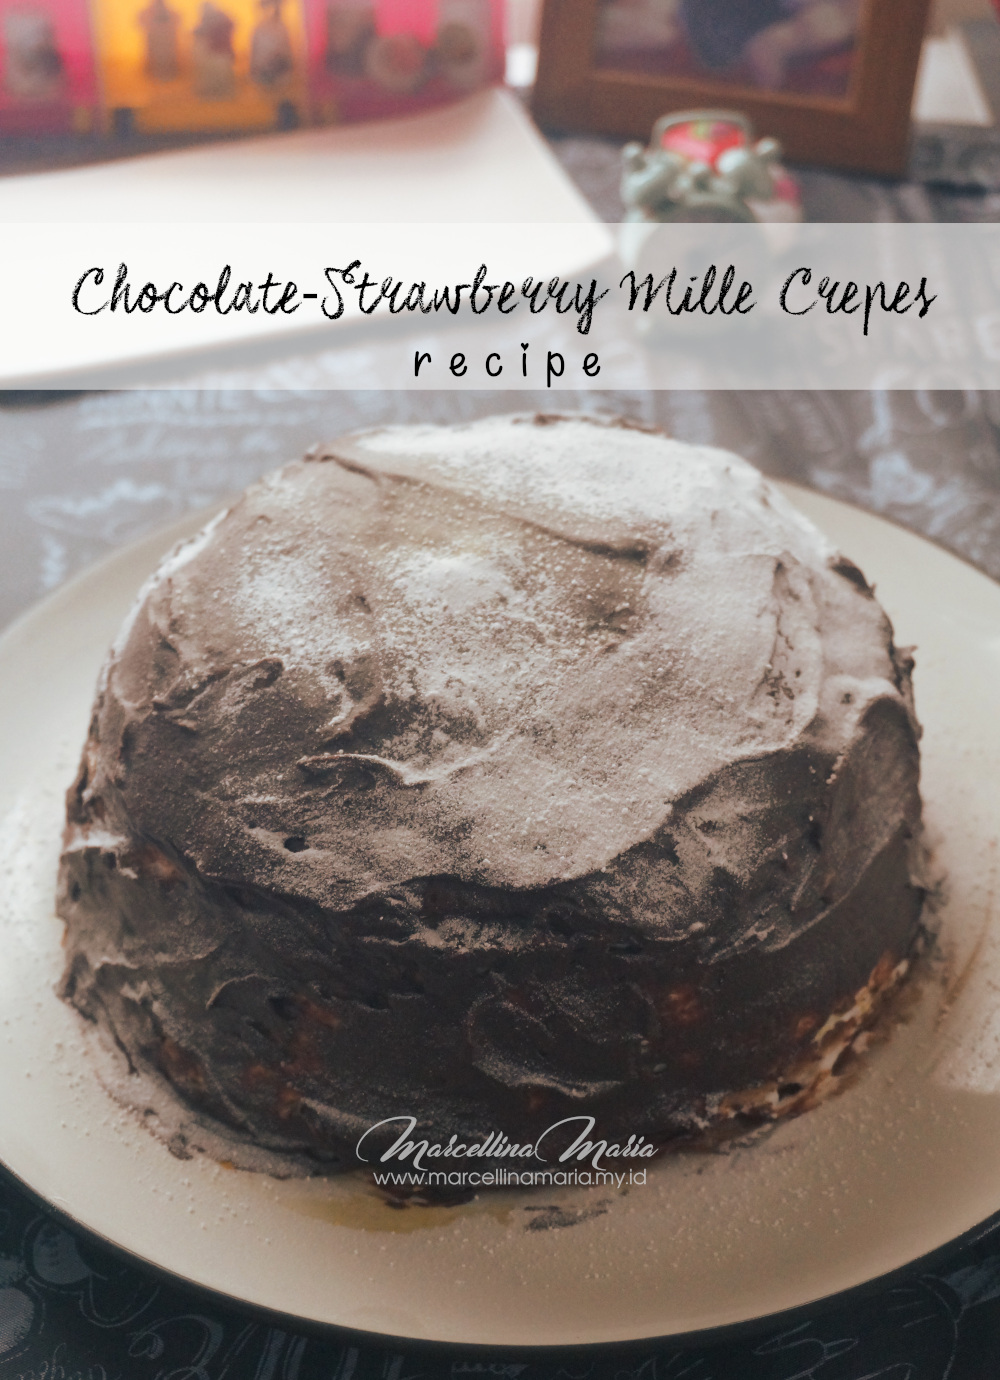 Chocolate - Strawberry Mille Crepes Recipe